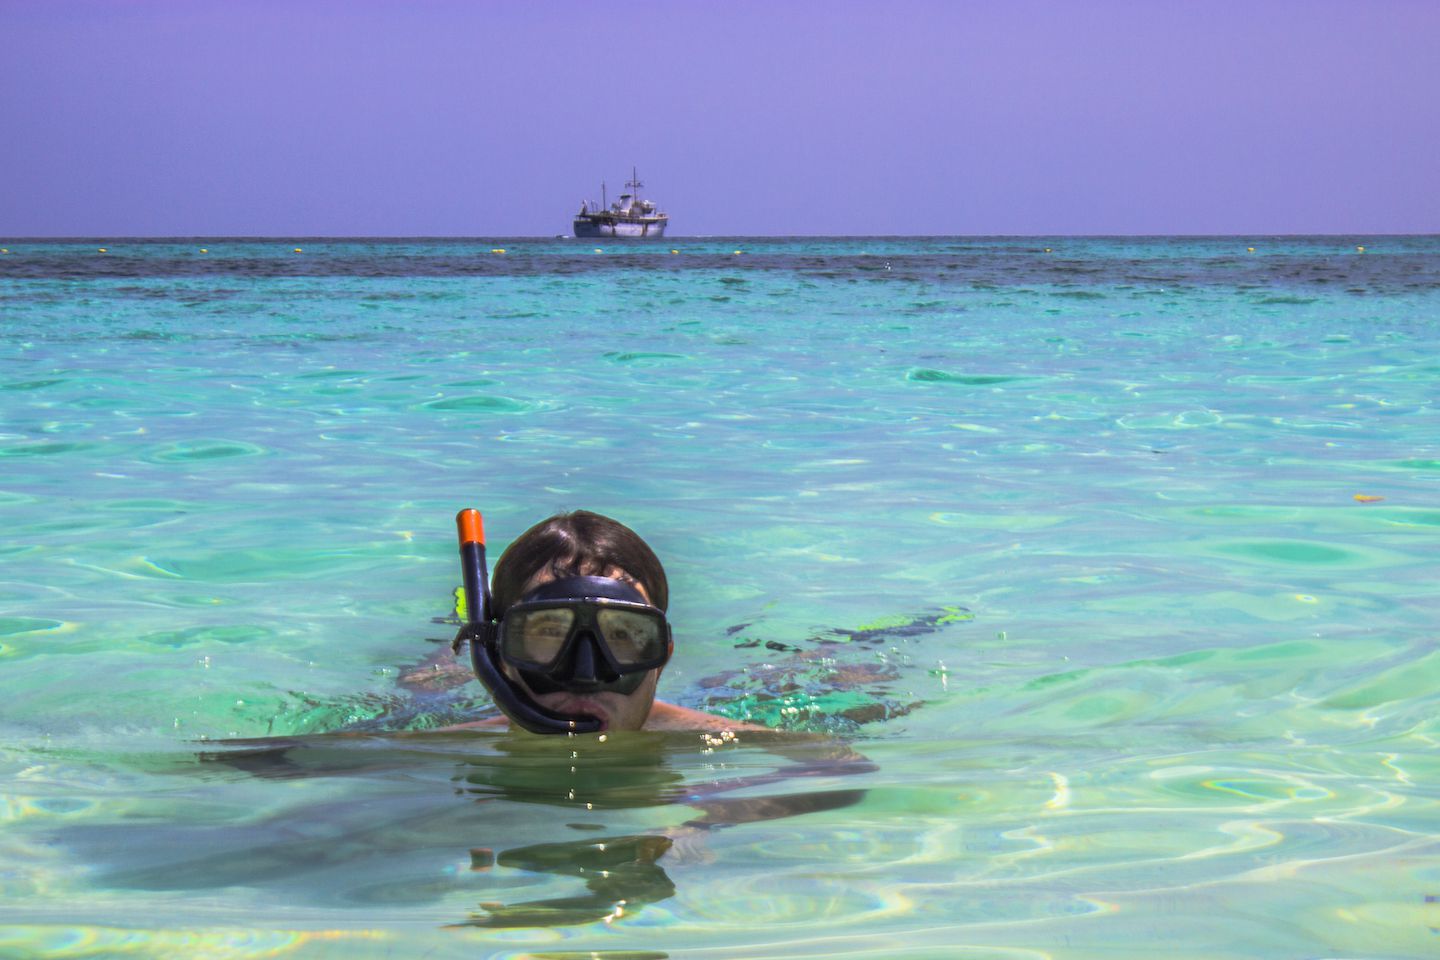 Carlos snorkeling in the clear waters of Koh Rok, Thailand